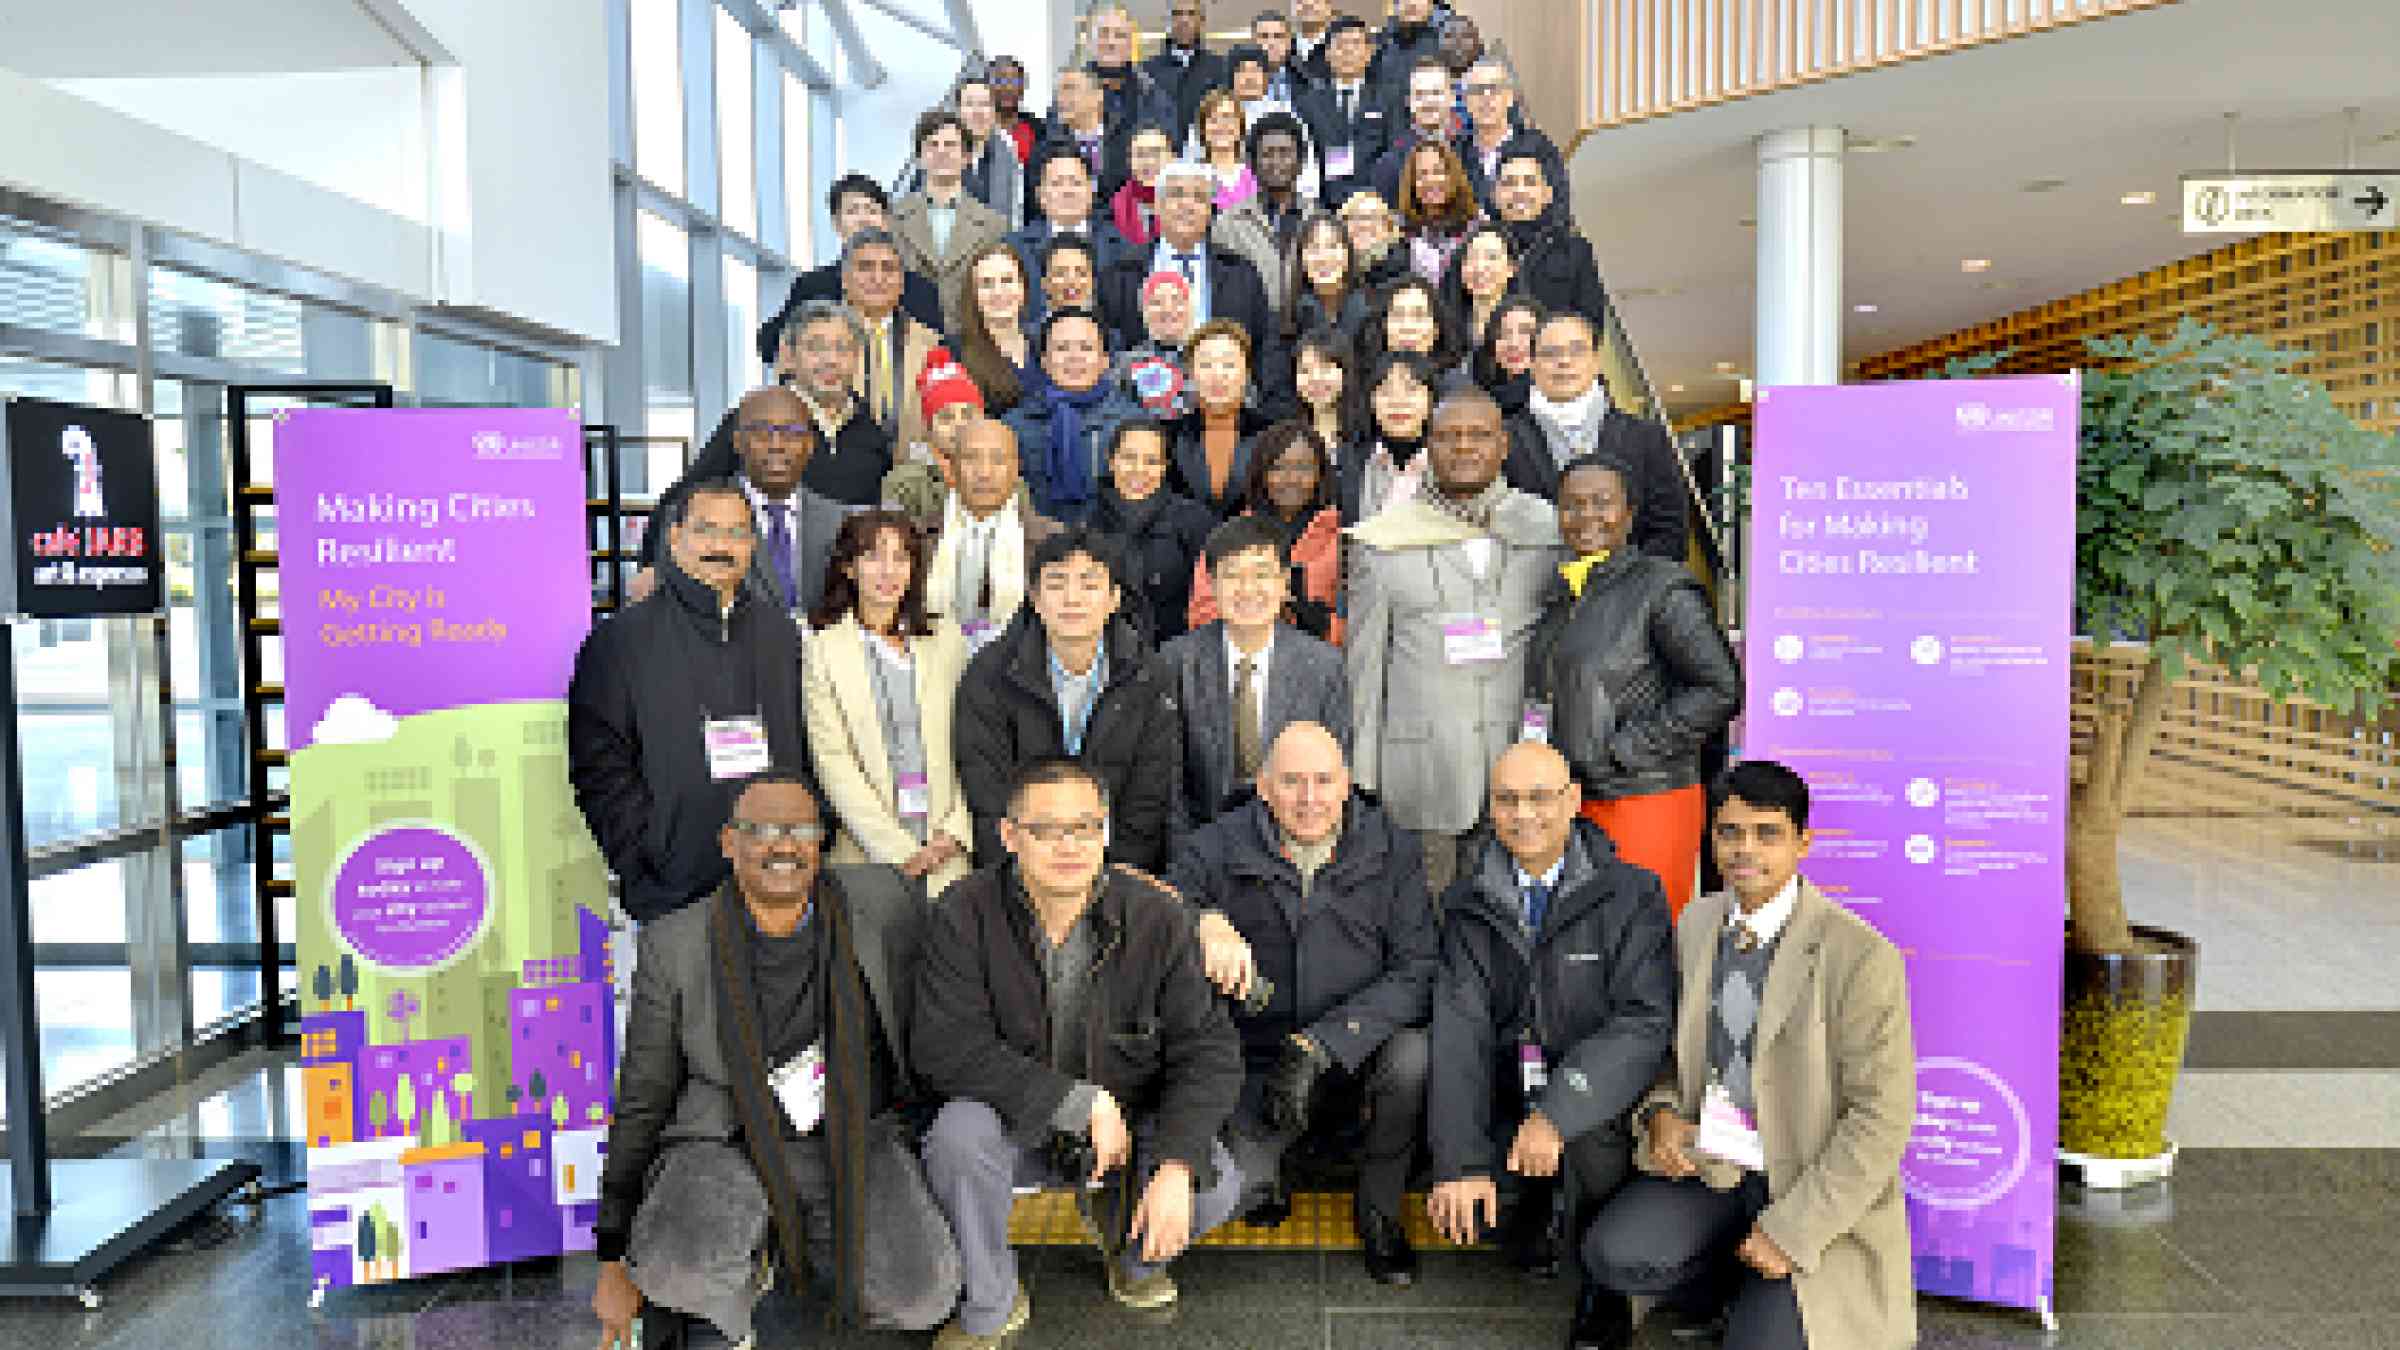 Participants at the ‘Training of Trainers on Making Cities Resilient: Developing and Implementing Disaster Risk Reduction Action Plans’ workshop (photo: UNISDR)